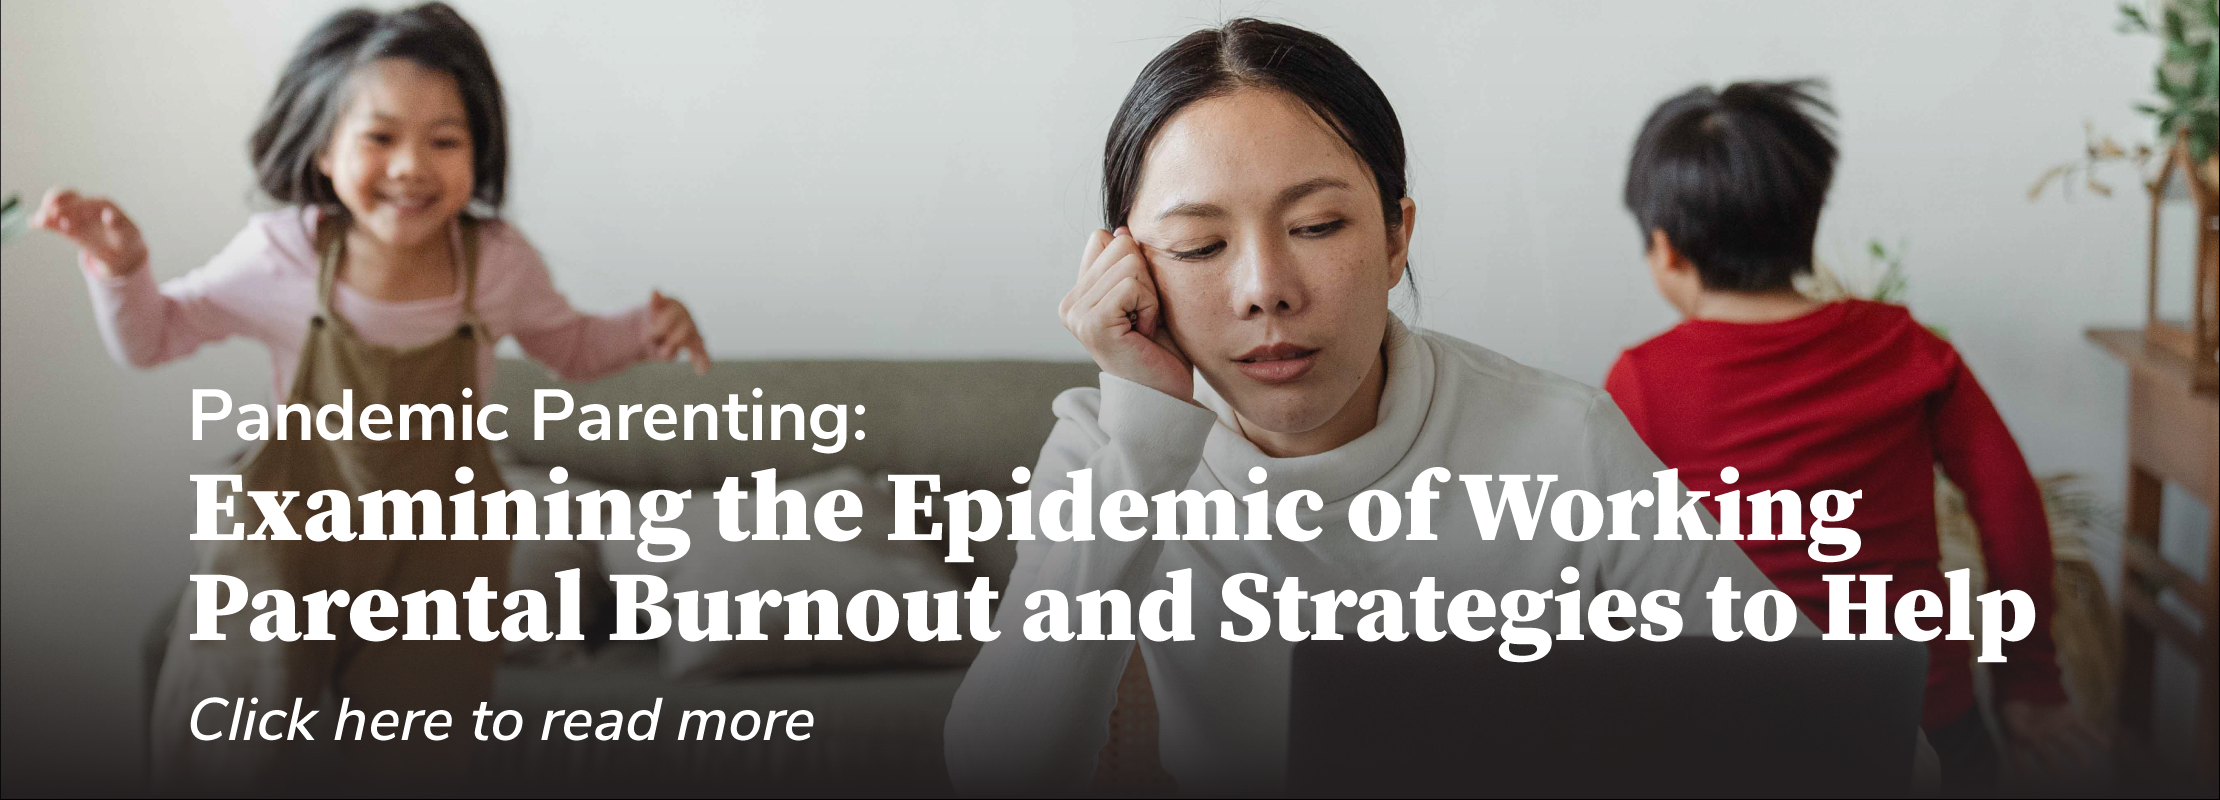 Pandemic Parenting: Examining the Epidemic of Working Parental Burnout and Strategies to Help - Click here to read more